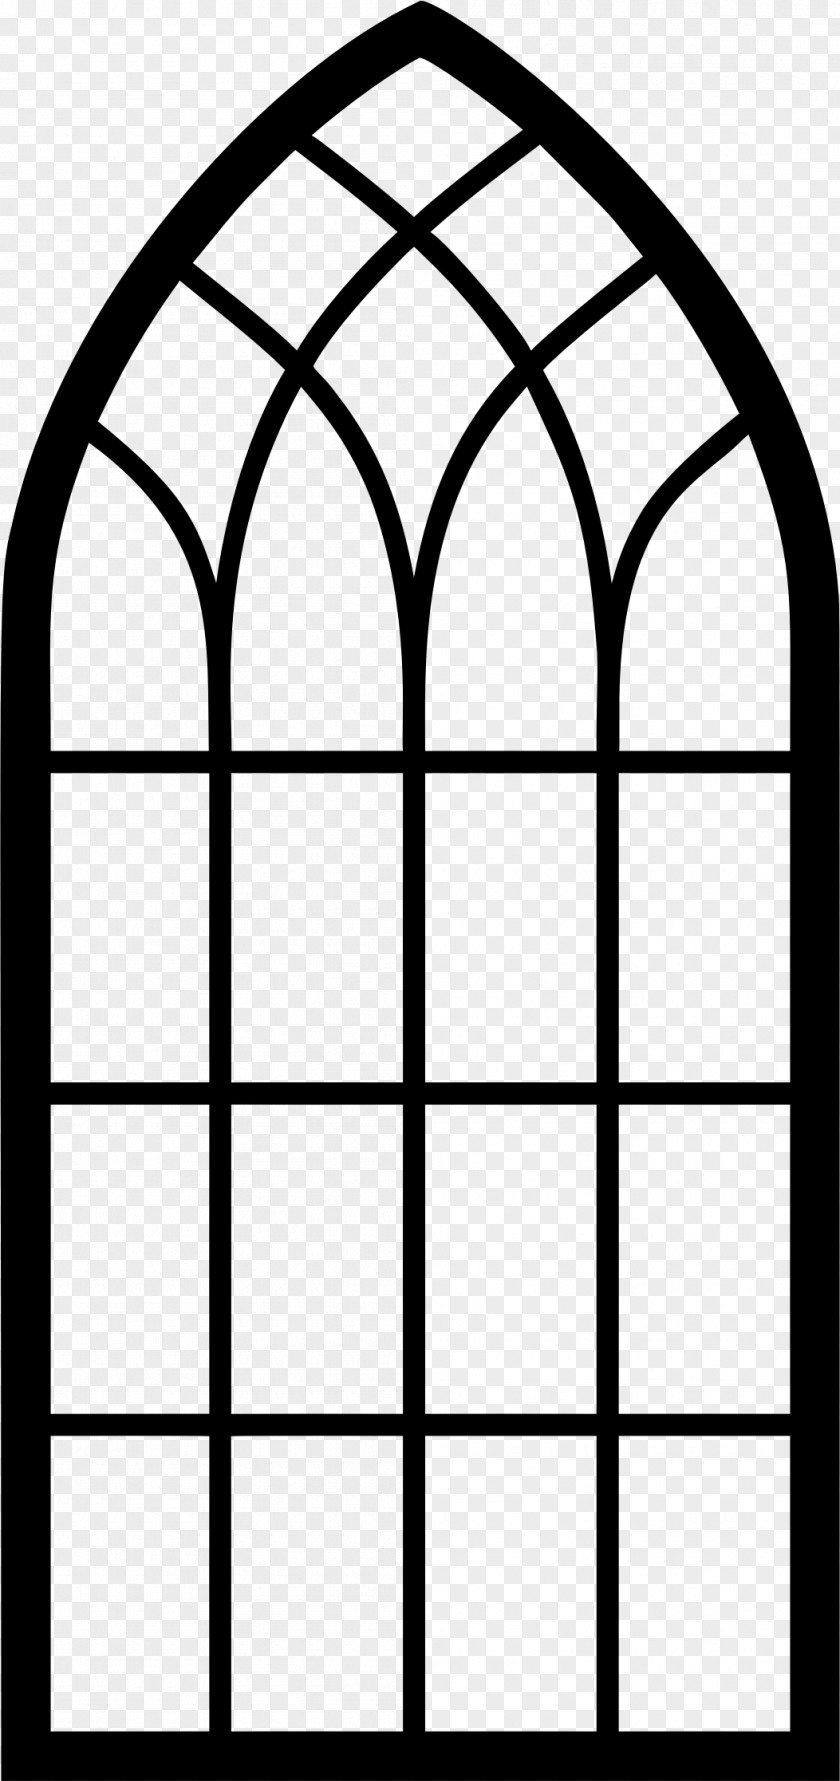 Church Window PNG clipart PNG